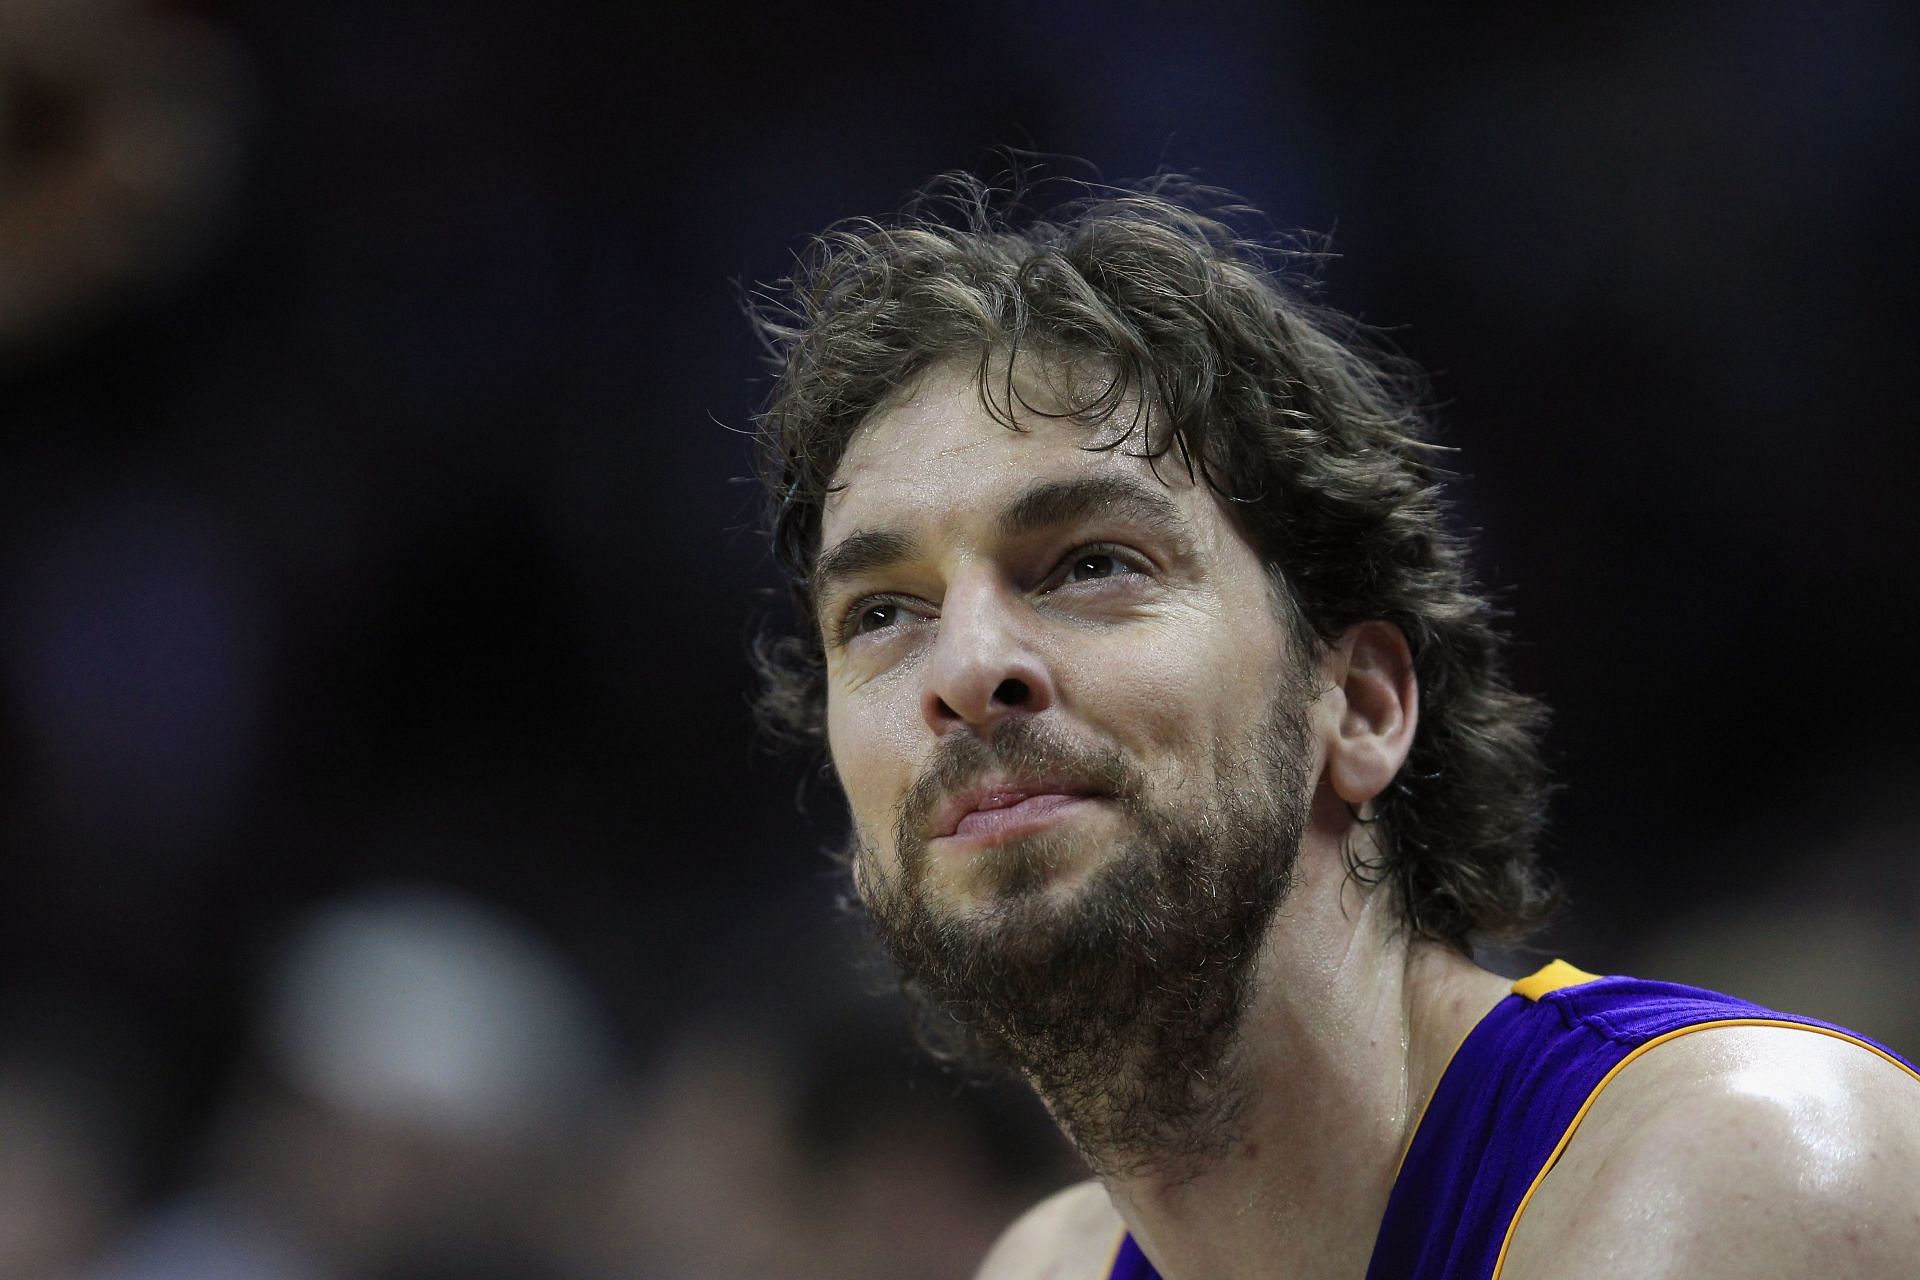 Pau Gasol looks on at a Lakers game